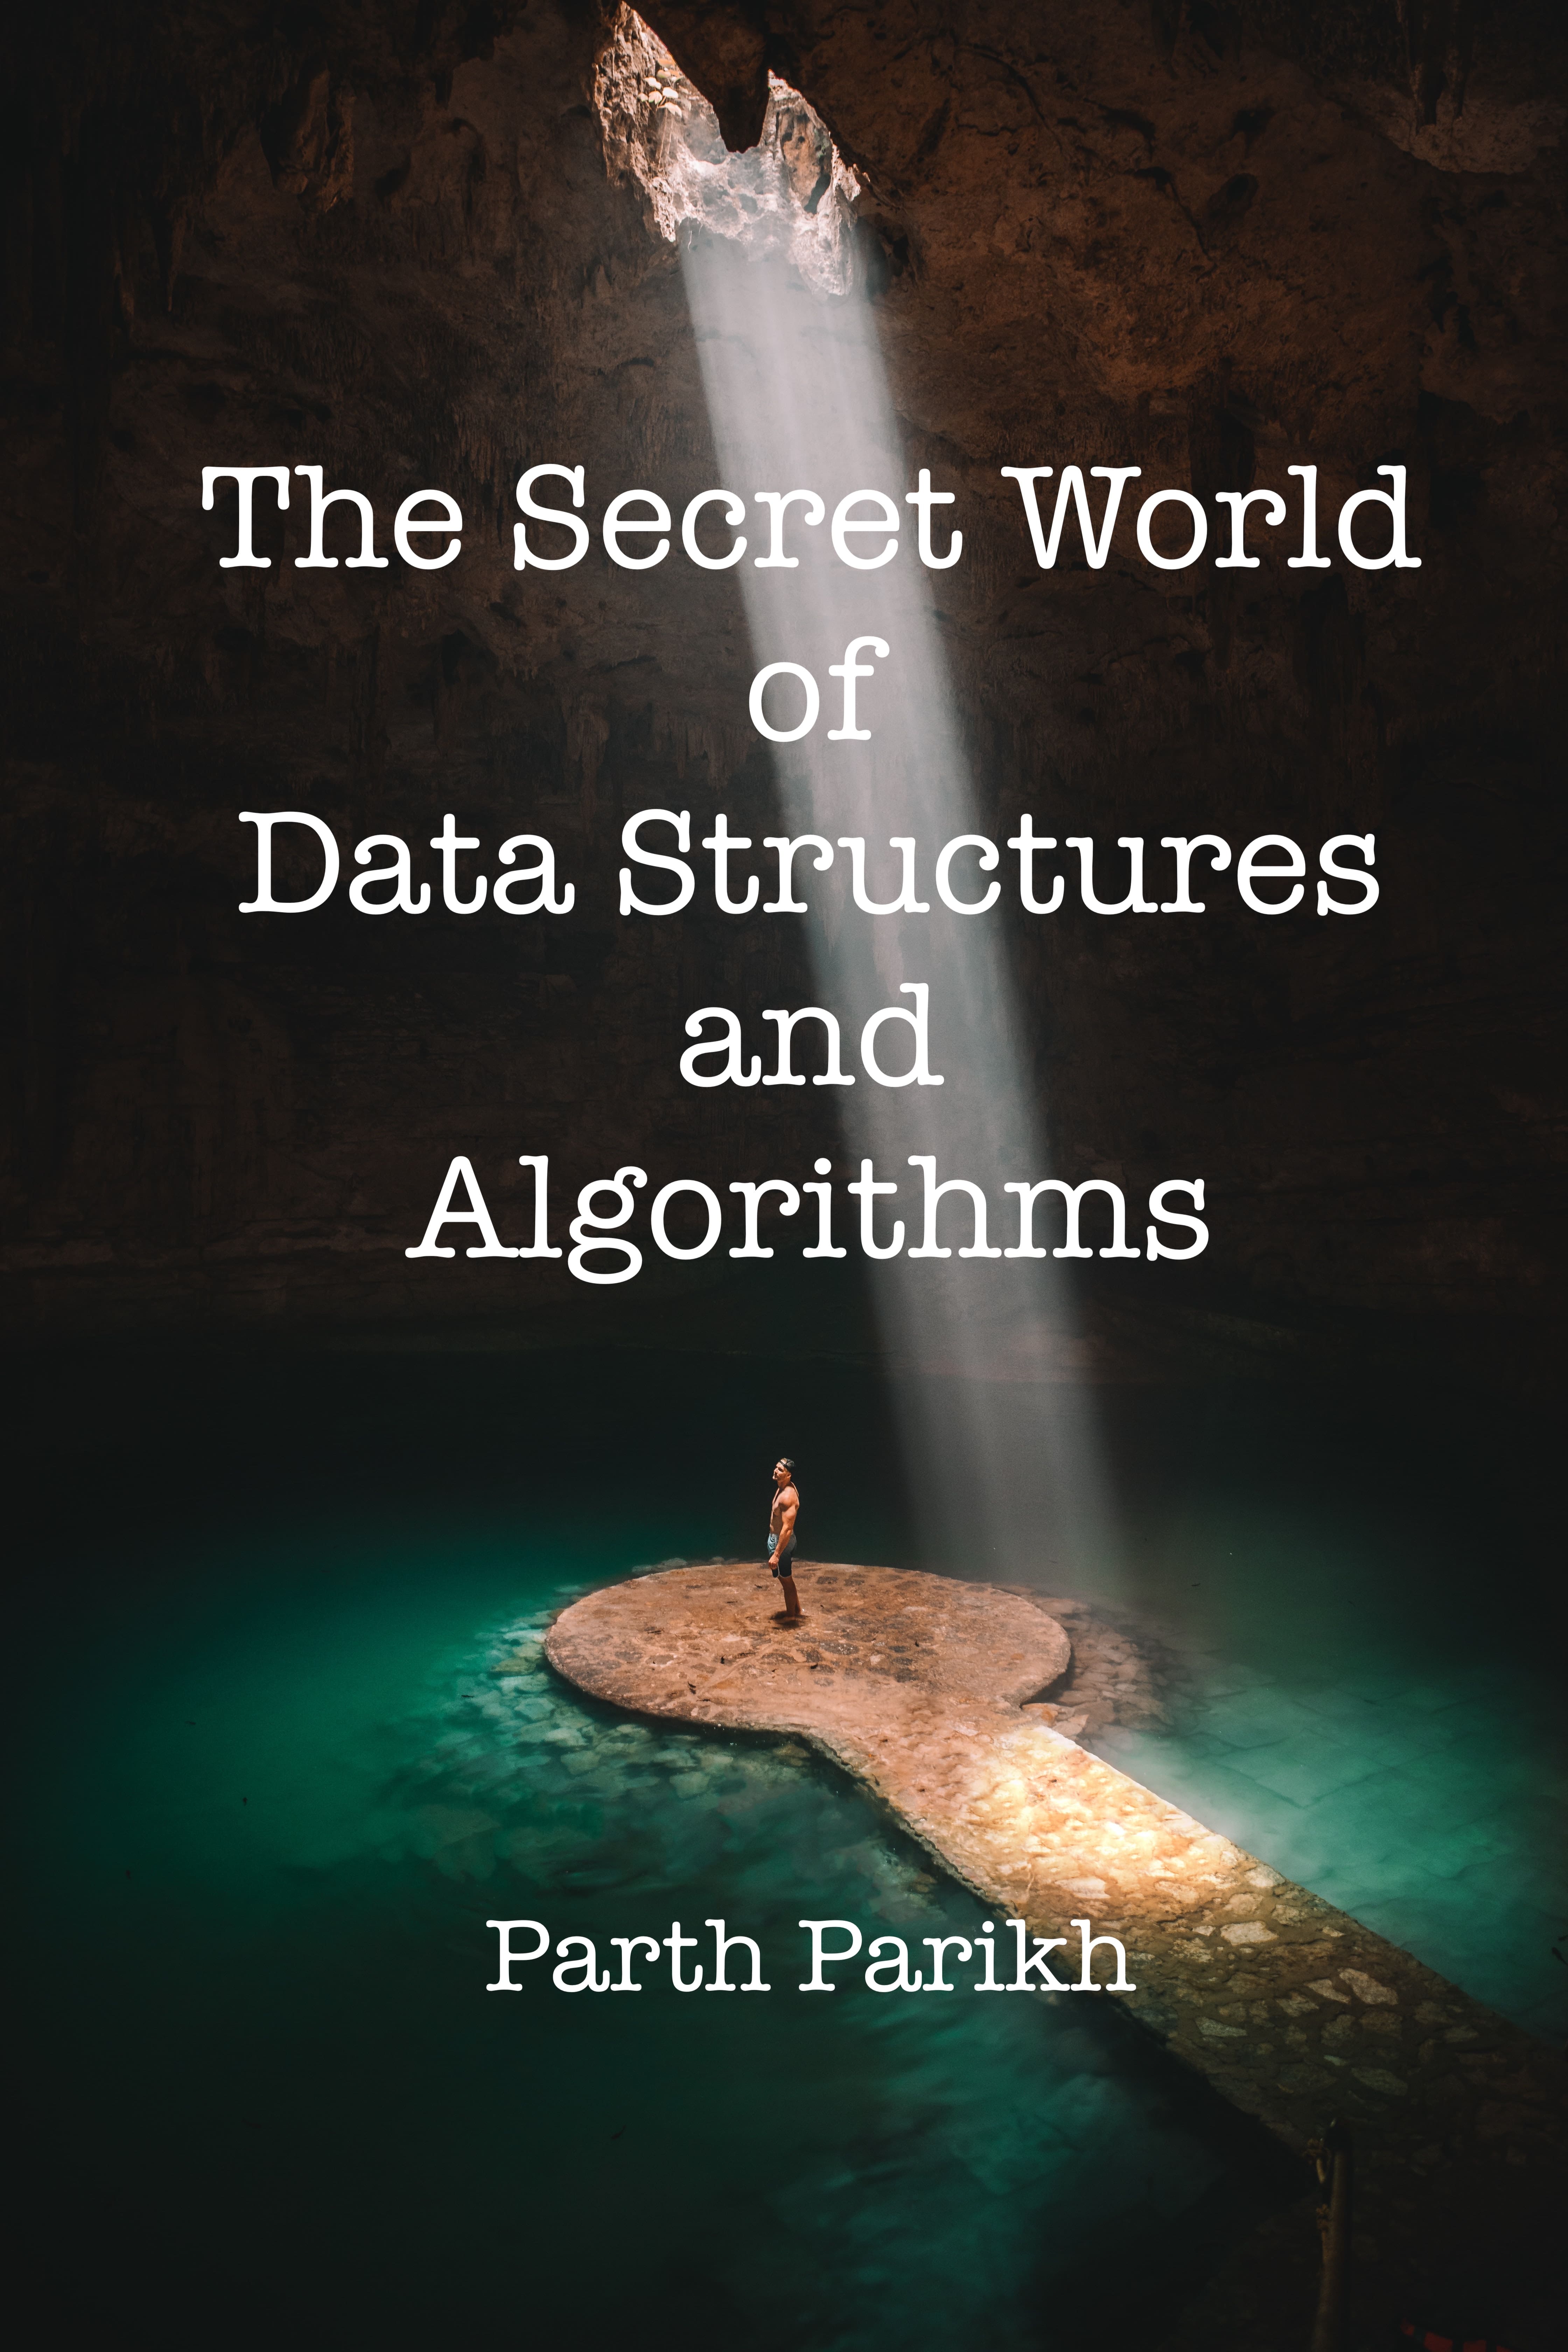 The Secret World of Data Structures and Algorithms